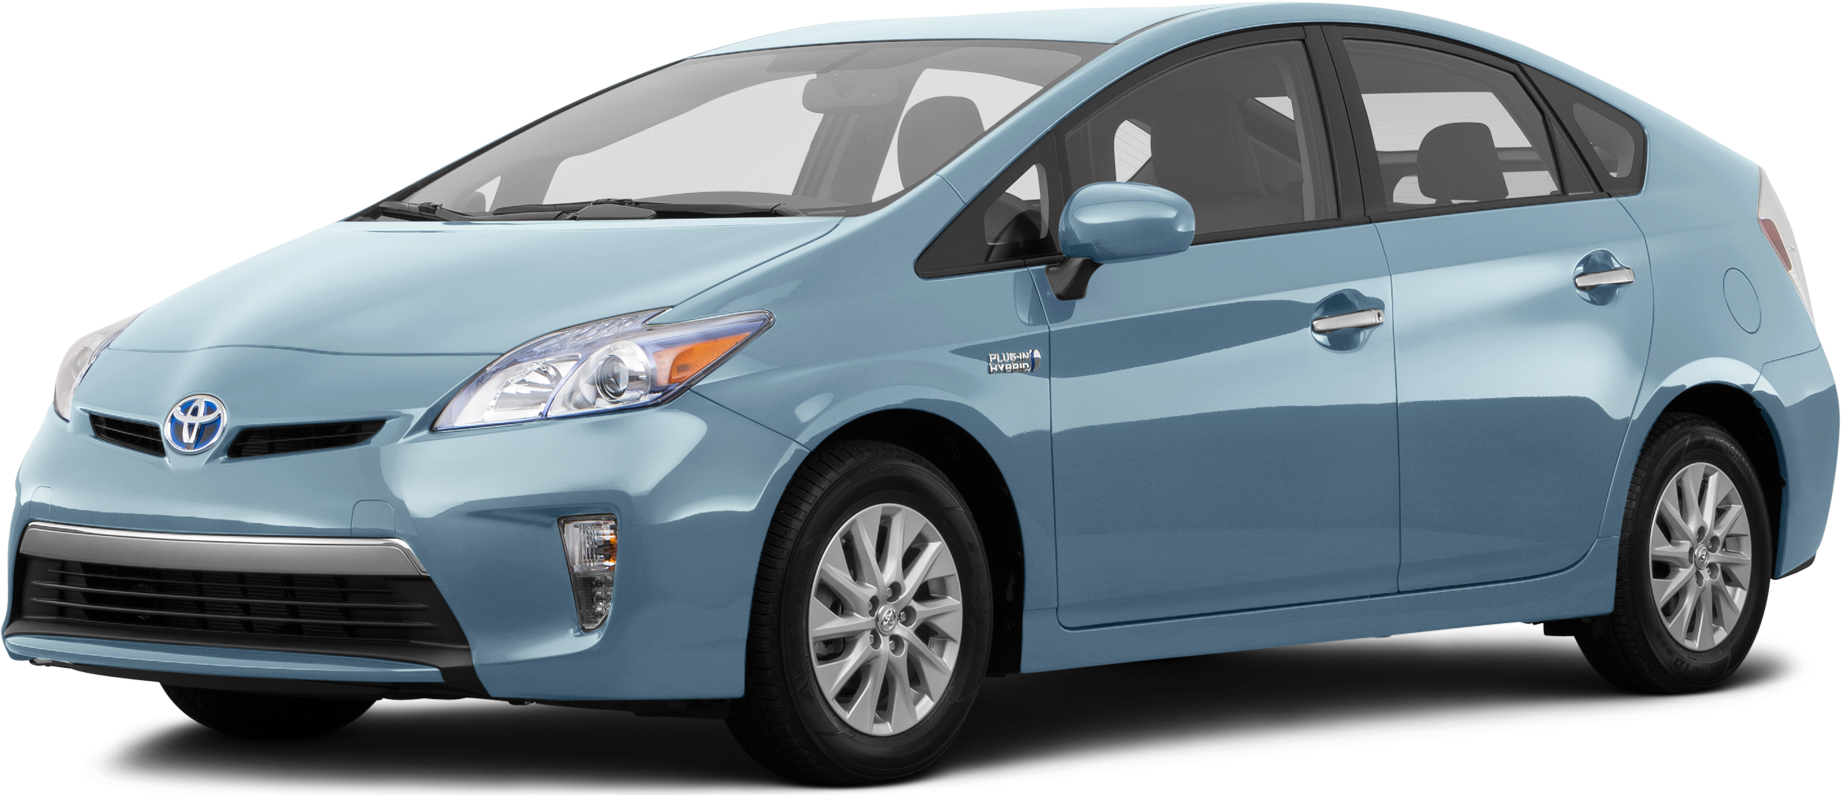 2014 Toyota Prius Plug-In Hybrid Values & Cars For Sale | Kelley Blue Book